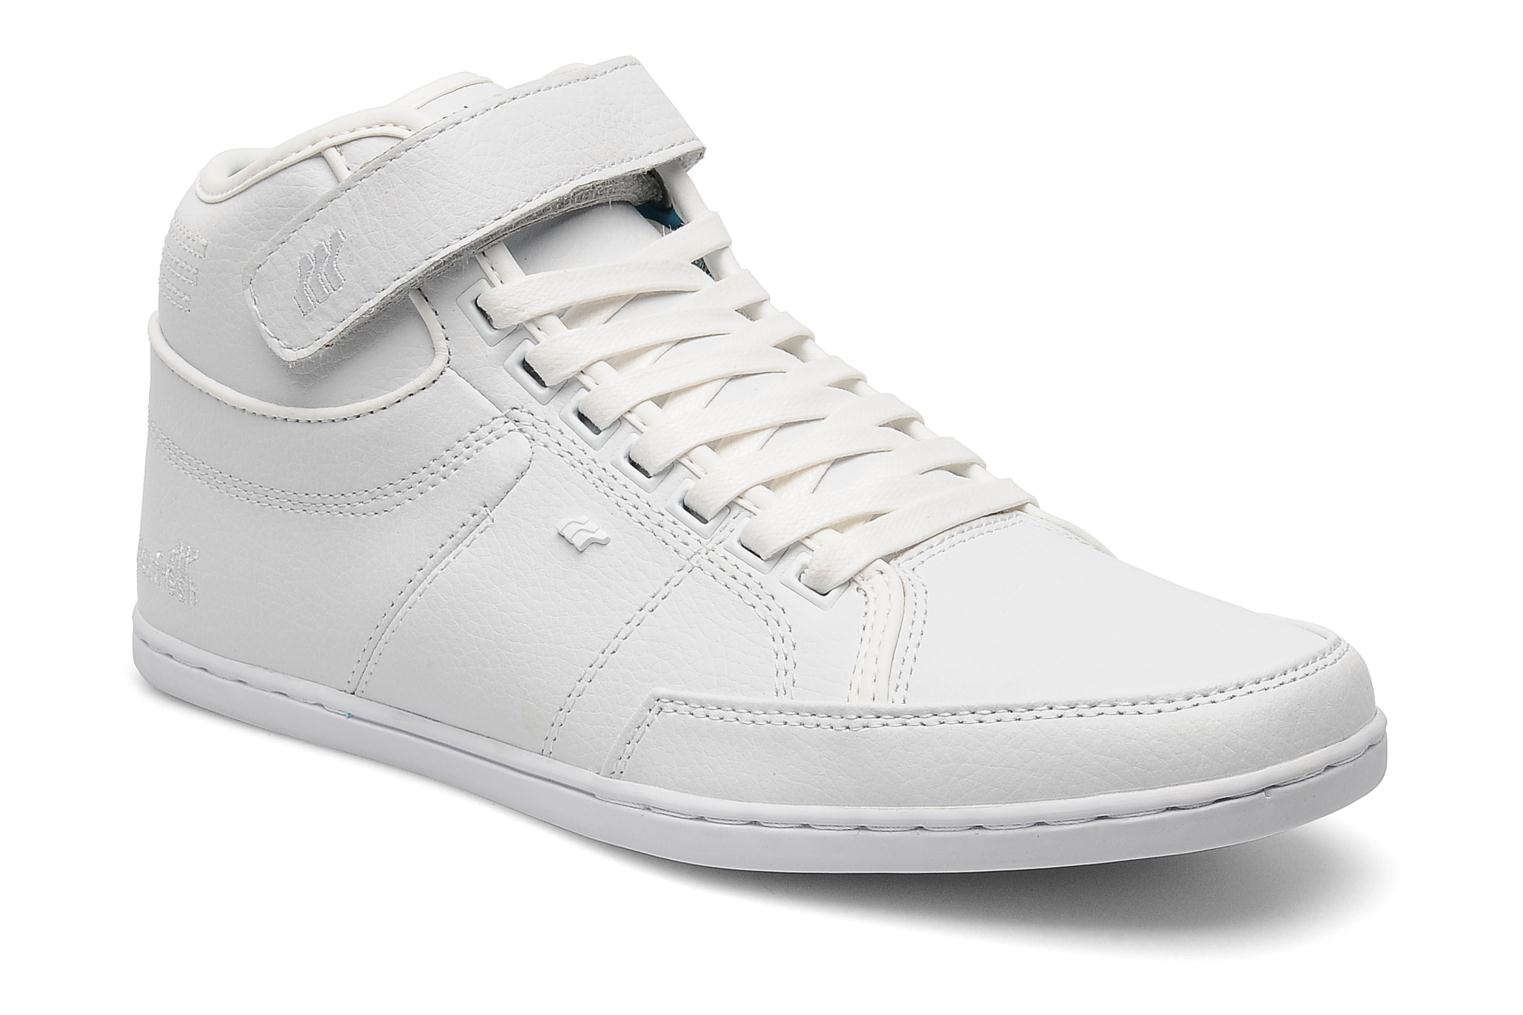 Boxfresh SWICH Trainers in White at Sarenza.co.uk (153190)